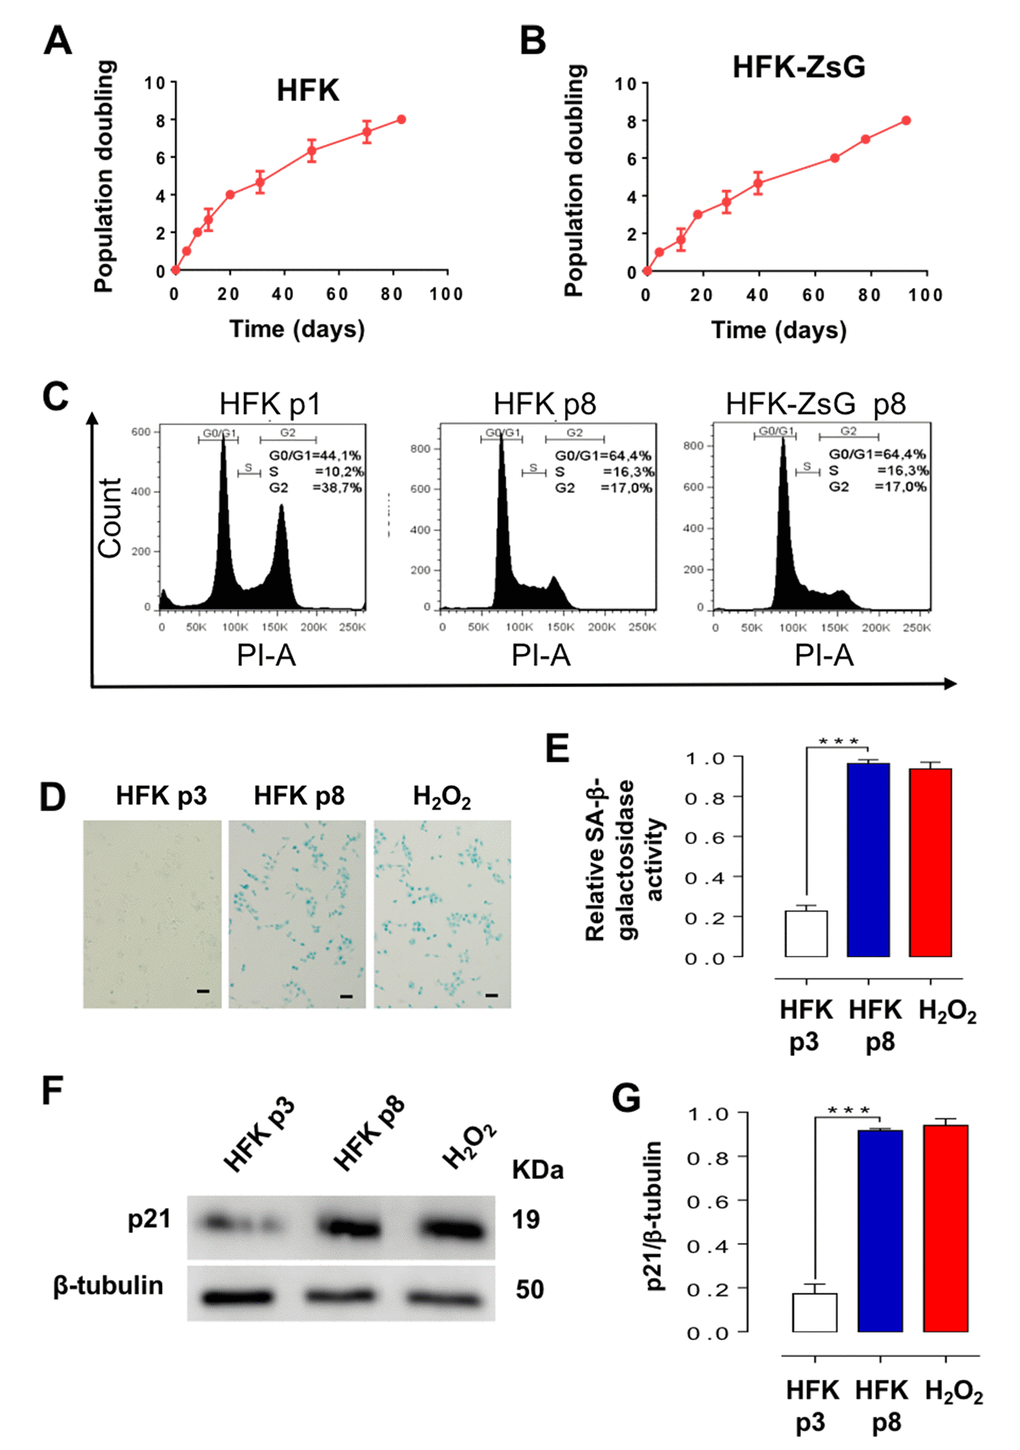 HFK and HFK-ZsG undergo senescent arrest in G1 at p8. (A, B) A triplicate analysis of proliferation rate of HFK and HFK-ZsG was plotted as time (days) versus cell doubling or passage number. Neither cell population proliferated past p8. (C) Flow cytometry of HFK at p1 and p8 and HFK-ZsG at p8 shows that non-E2-expressing cells arrest in G1 at p8. (D) HFK at p8 were positive for SA-β-galactosidase staining, which was negative in p3 cells. H2O2 was used as positive senescence control (Bars = 100 μm). (E) A triplicate analysis of the results shown in D revealed a 4 to 5-fold increase in SA-β-galactosidase activity, compared to p3 cells, and similar to the level of HFK treated with H2O2 (***pF) In HFK at p8, p21 was upregulated compared to p3 cells. (G) A triplicate analysis of the experiment in F revealed a 4 to 5-fold increase in p21 levels compared to p3 cells, and at a similar level to H2O2-treated cells (***p